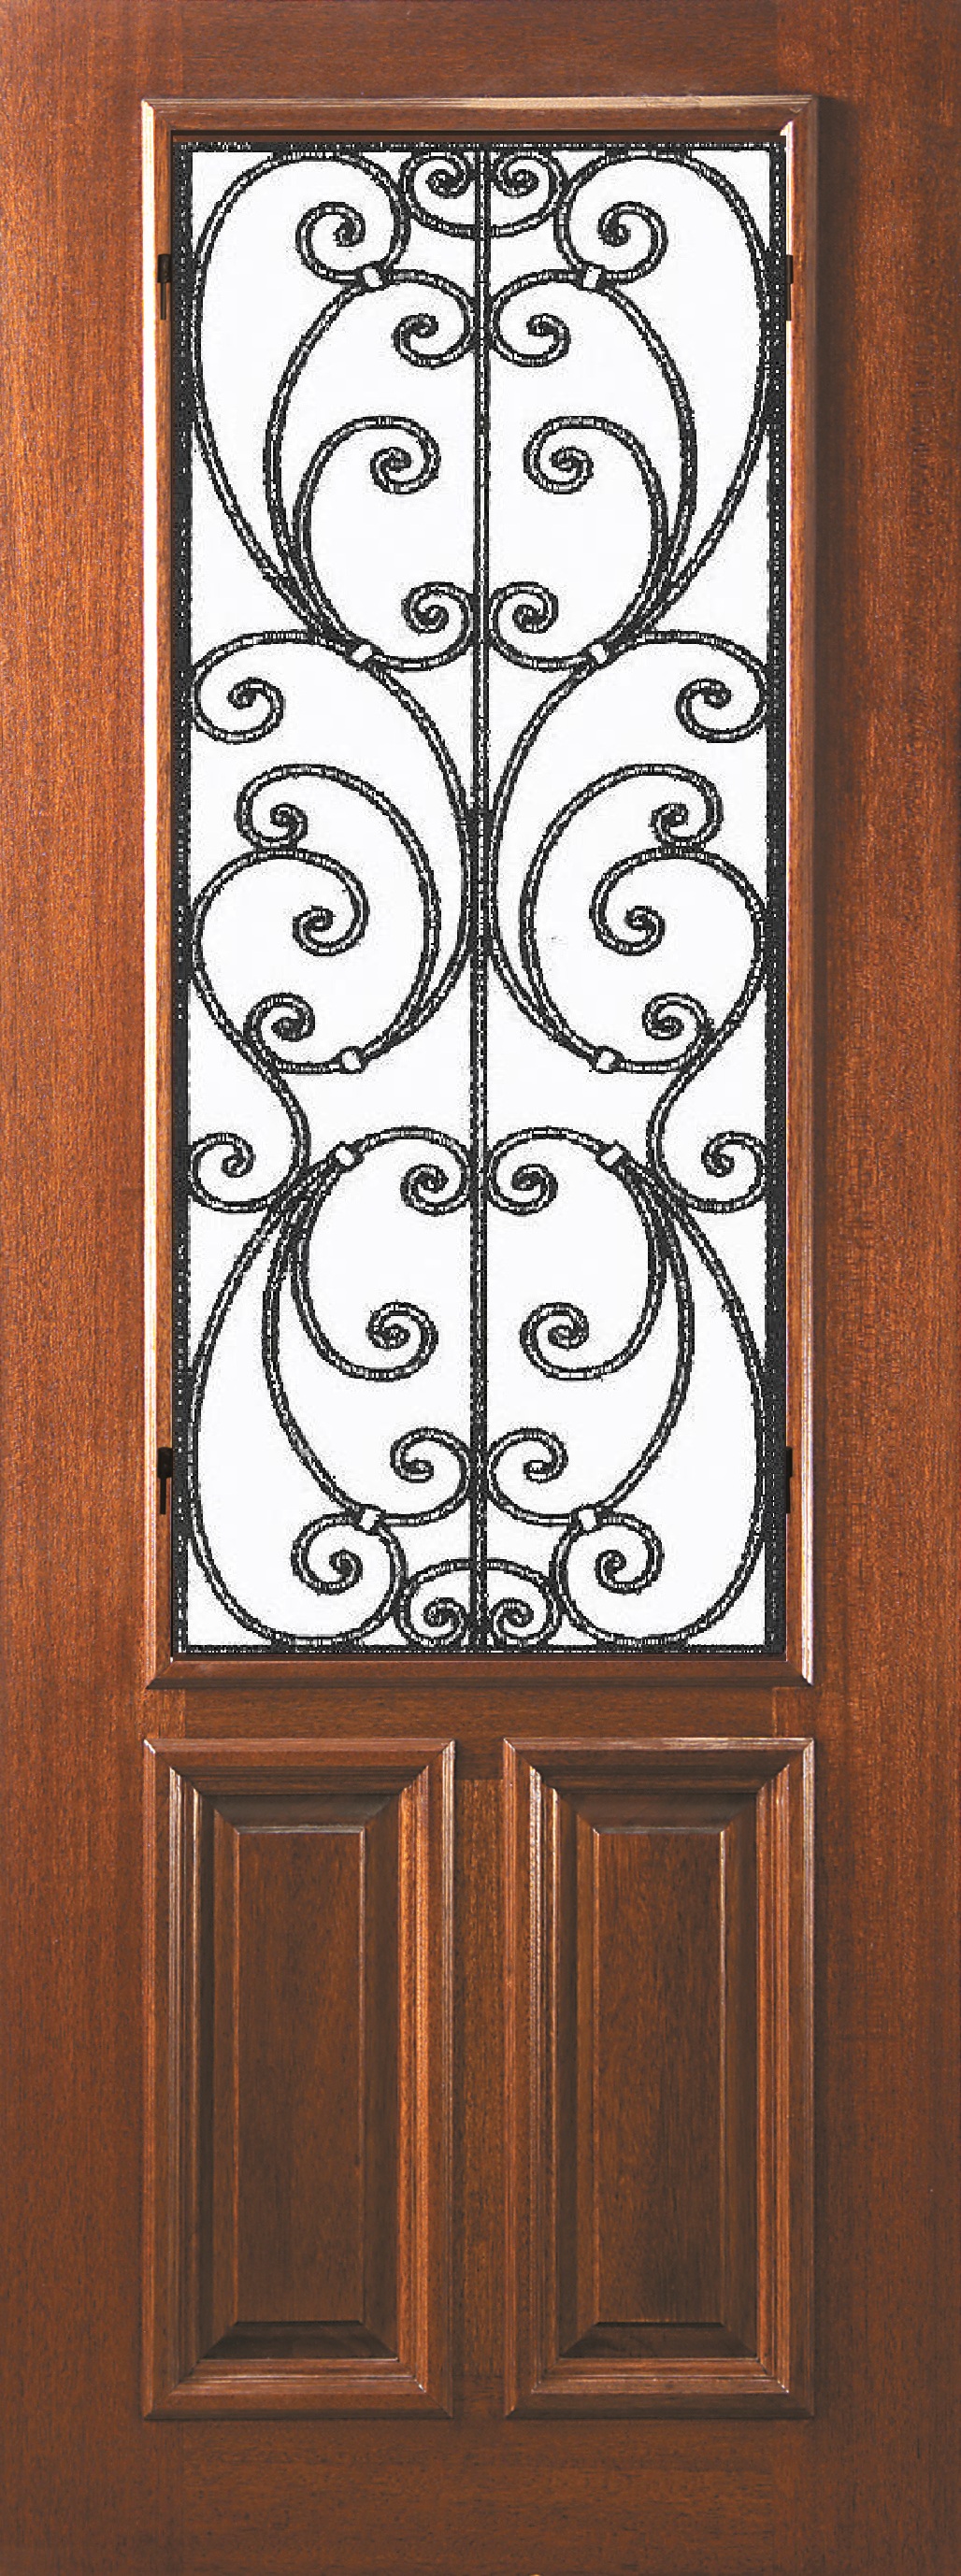 Wood and Wrought Iron Doors - The Front Door Company